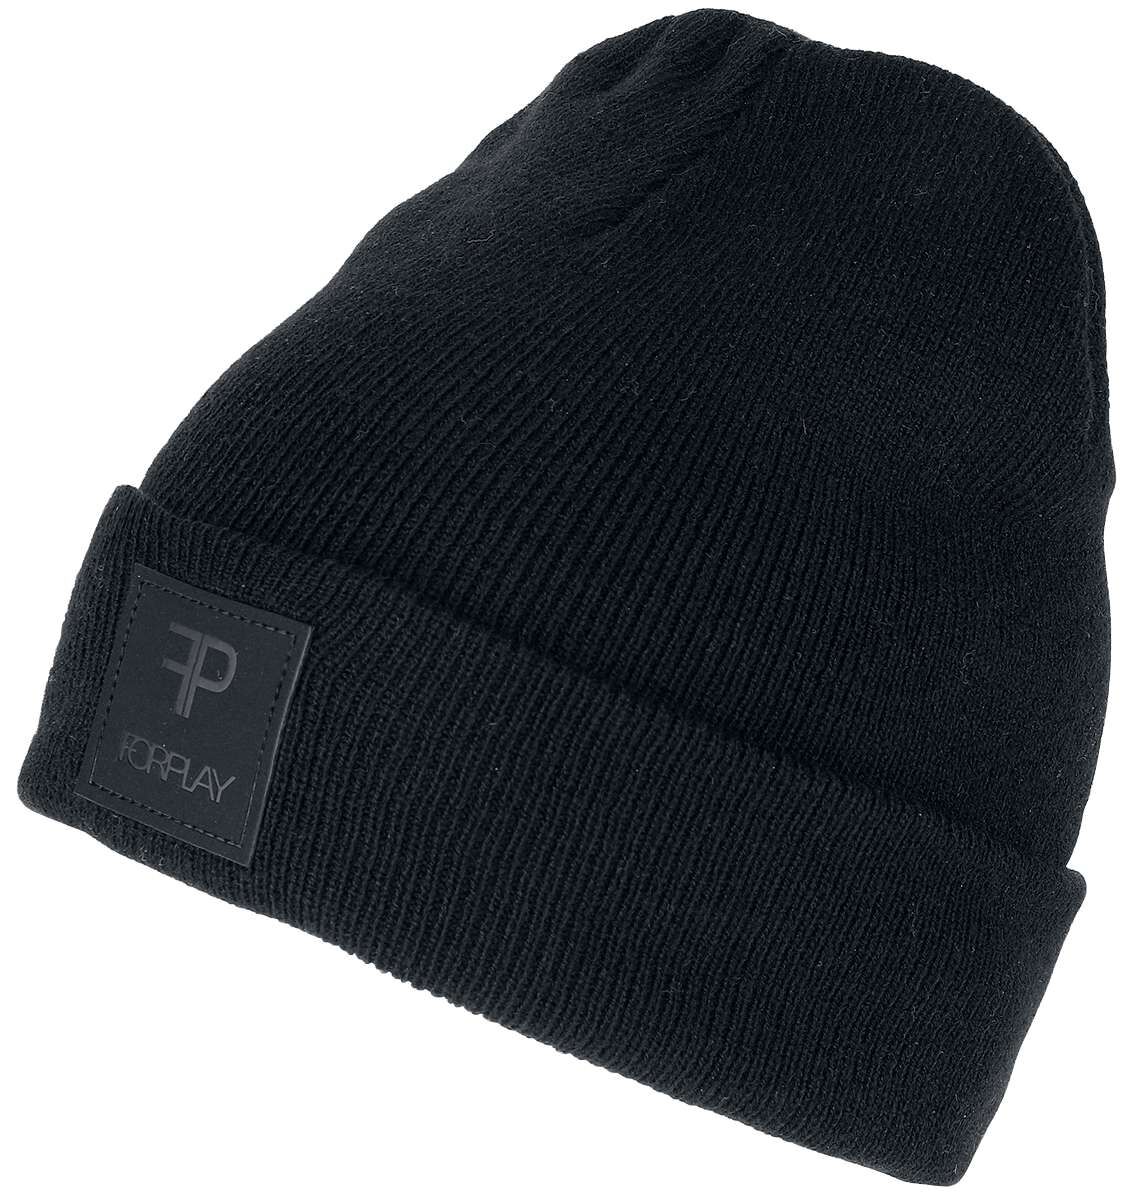 Image of Beanie di Forplay - Lucky - Unisex - nero